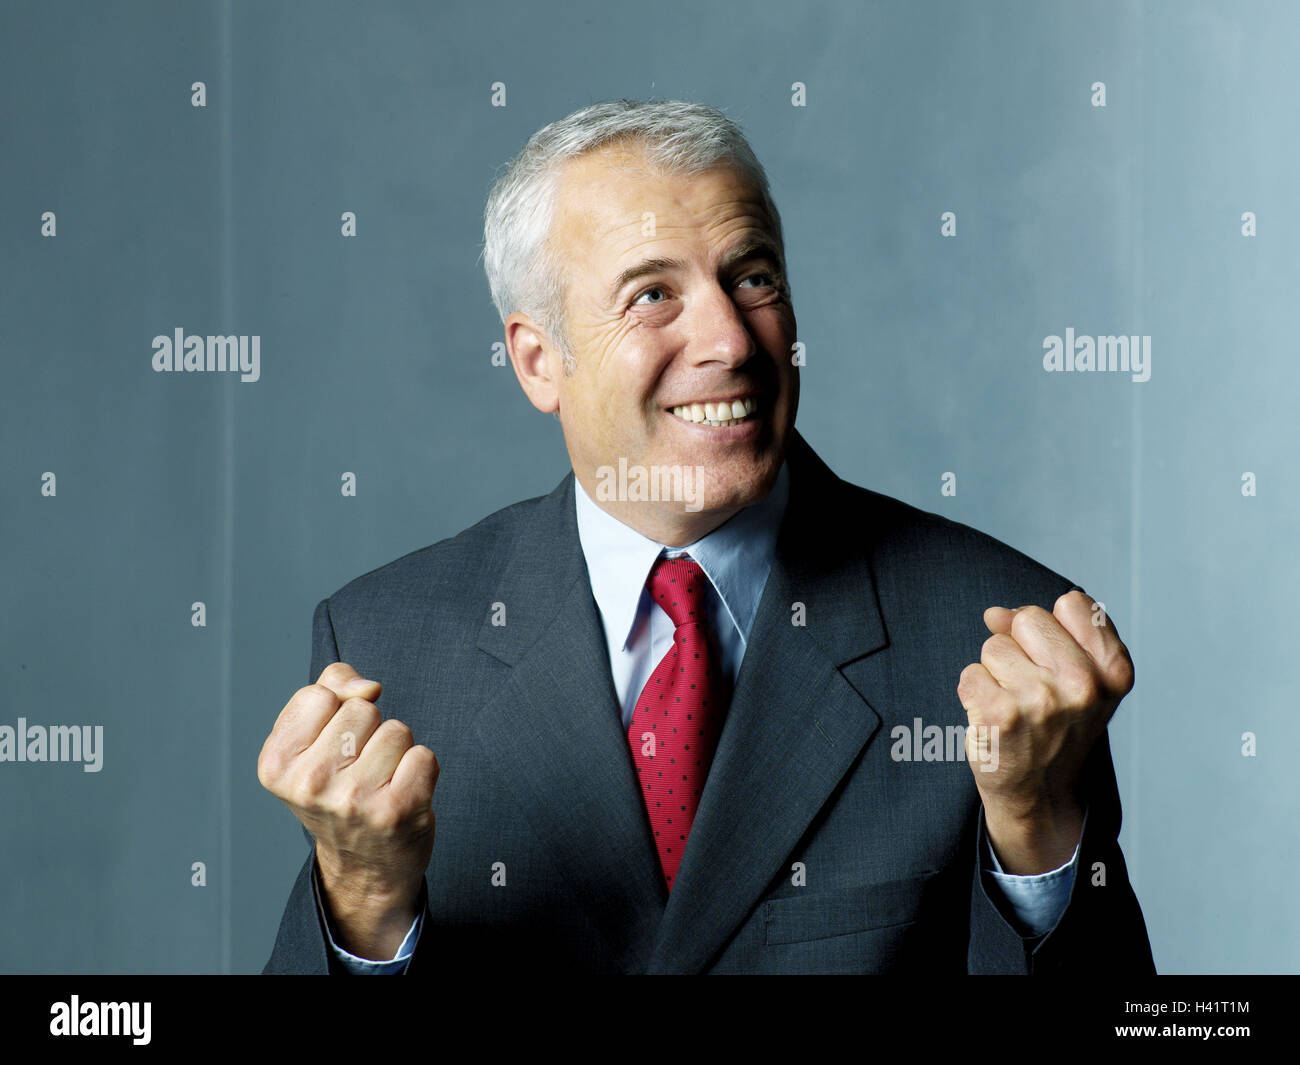 Man, grey-haired, middle old person, suit, enthusiastically, side glance, portrait, businessman, Manager, grey hair, gray hair, cultivated, seriously, smile, look up to high-level views, gesture, fists, emotion, enthusiasm, joy, success, victory, profit, positive mood, happy, contently, pleases, crazily, passionately, emotionally, certainly about victory, confidently, self-confidently, successfully, studio, Stock Photo